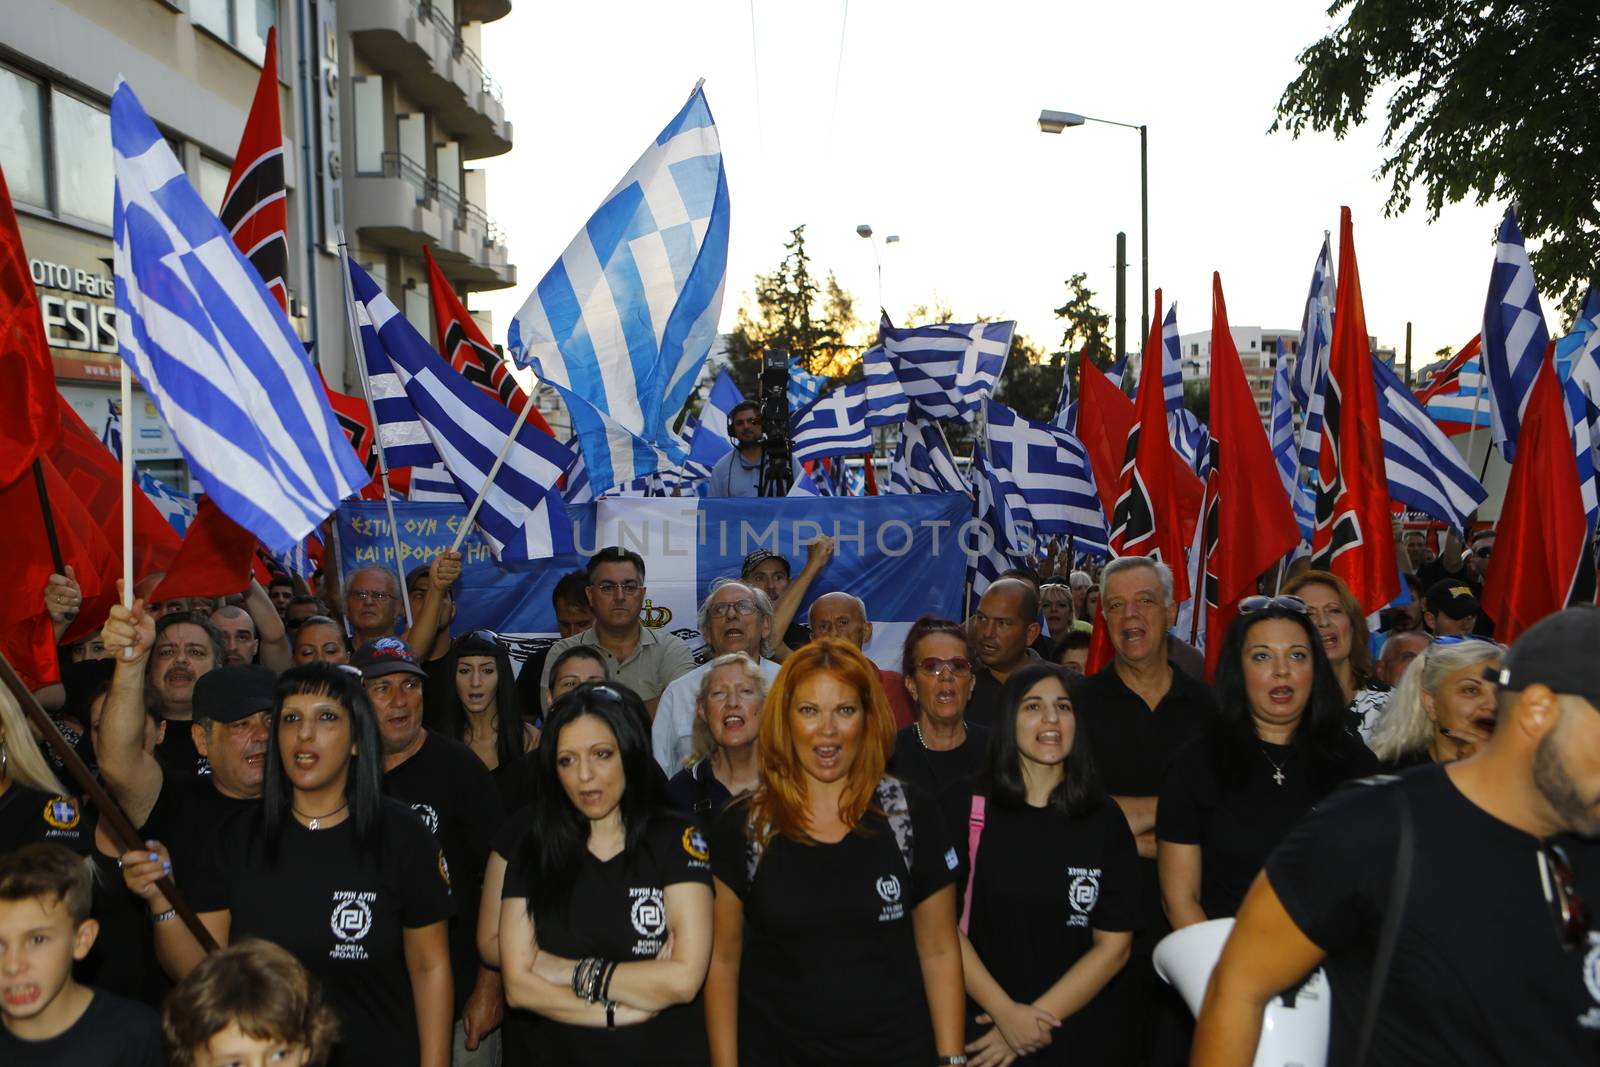 GREECE, Athens: Supporters gather as Greece's far-right Golden Dawn party holds an election rally in Athens on September 16, 2015, four days ahead of the country's snap national election. 